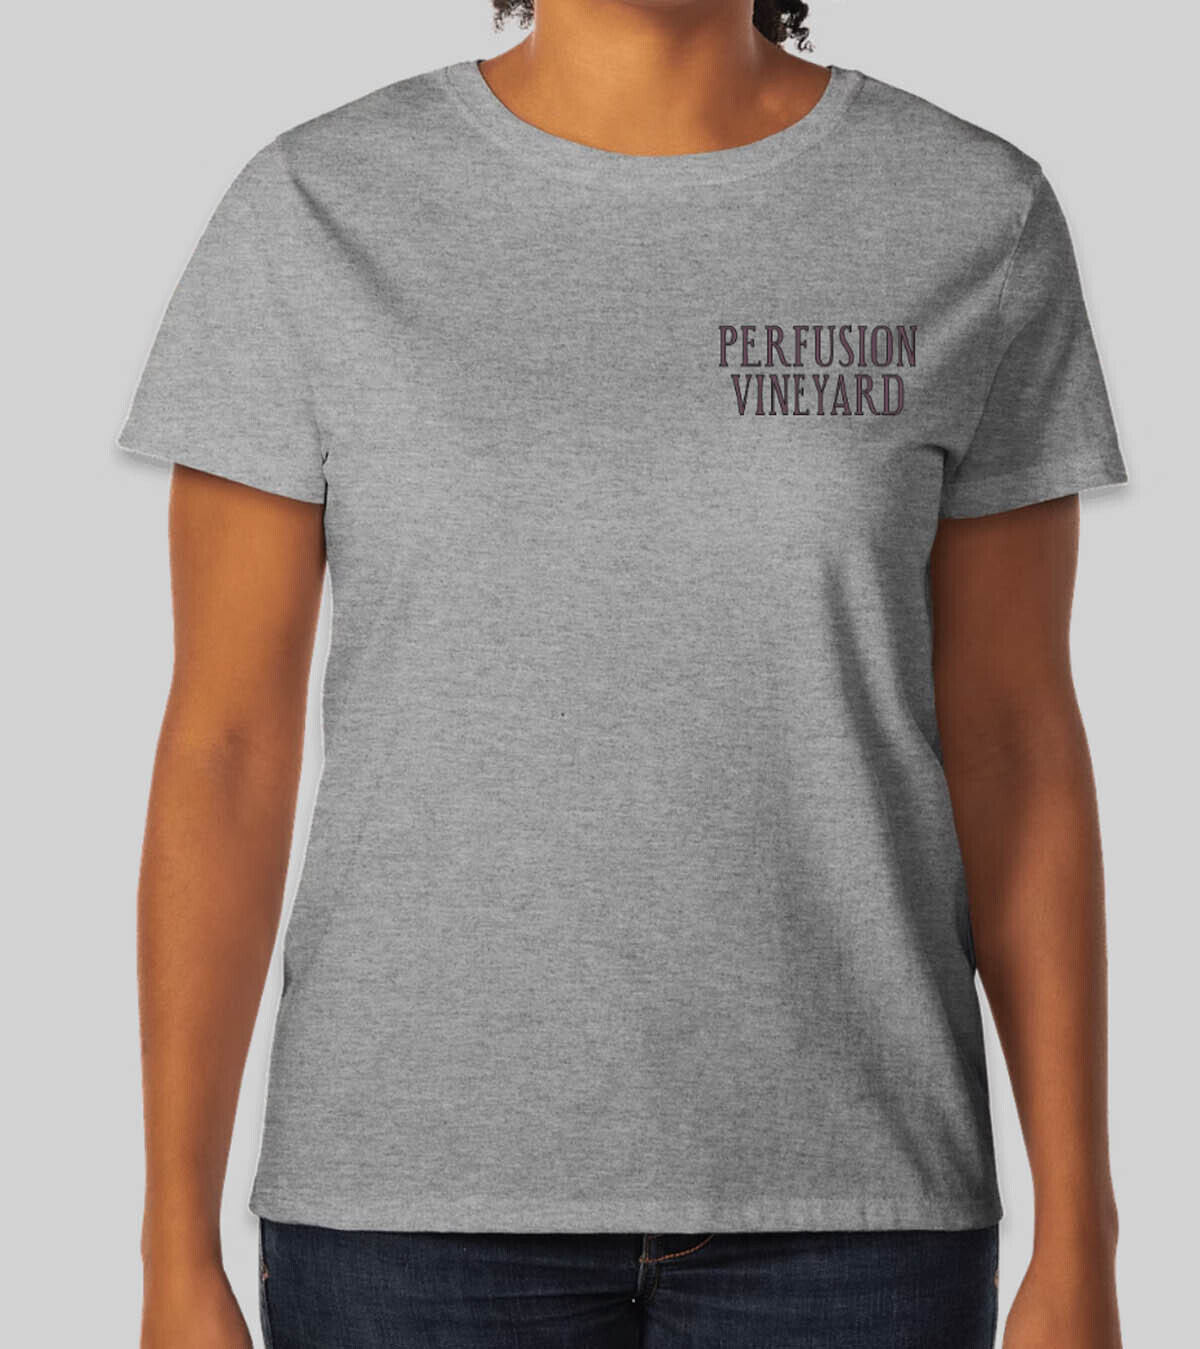 Perfusion T-shirt front